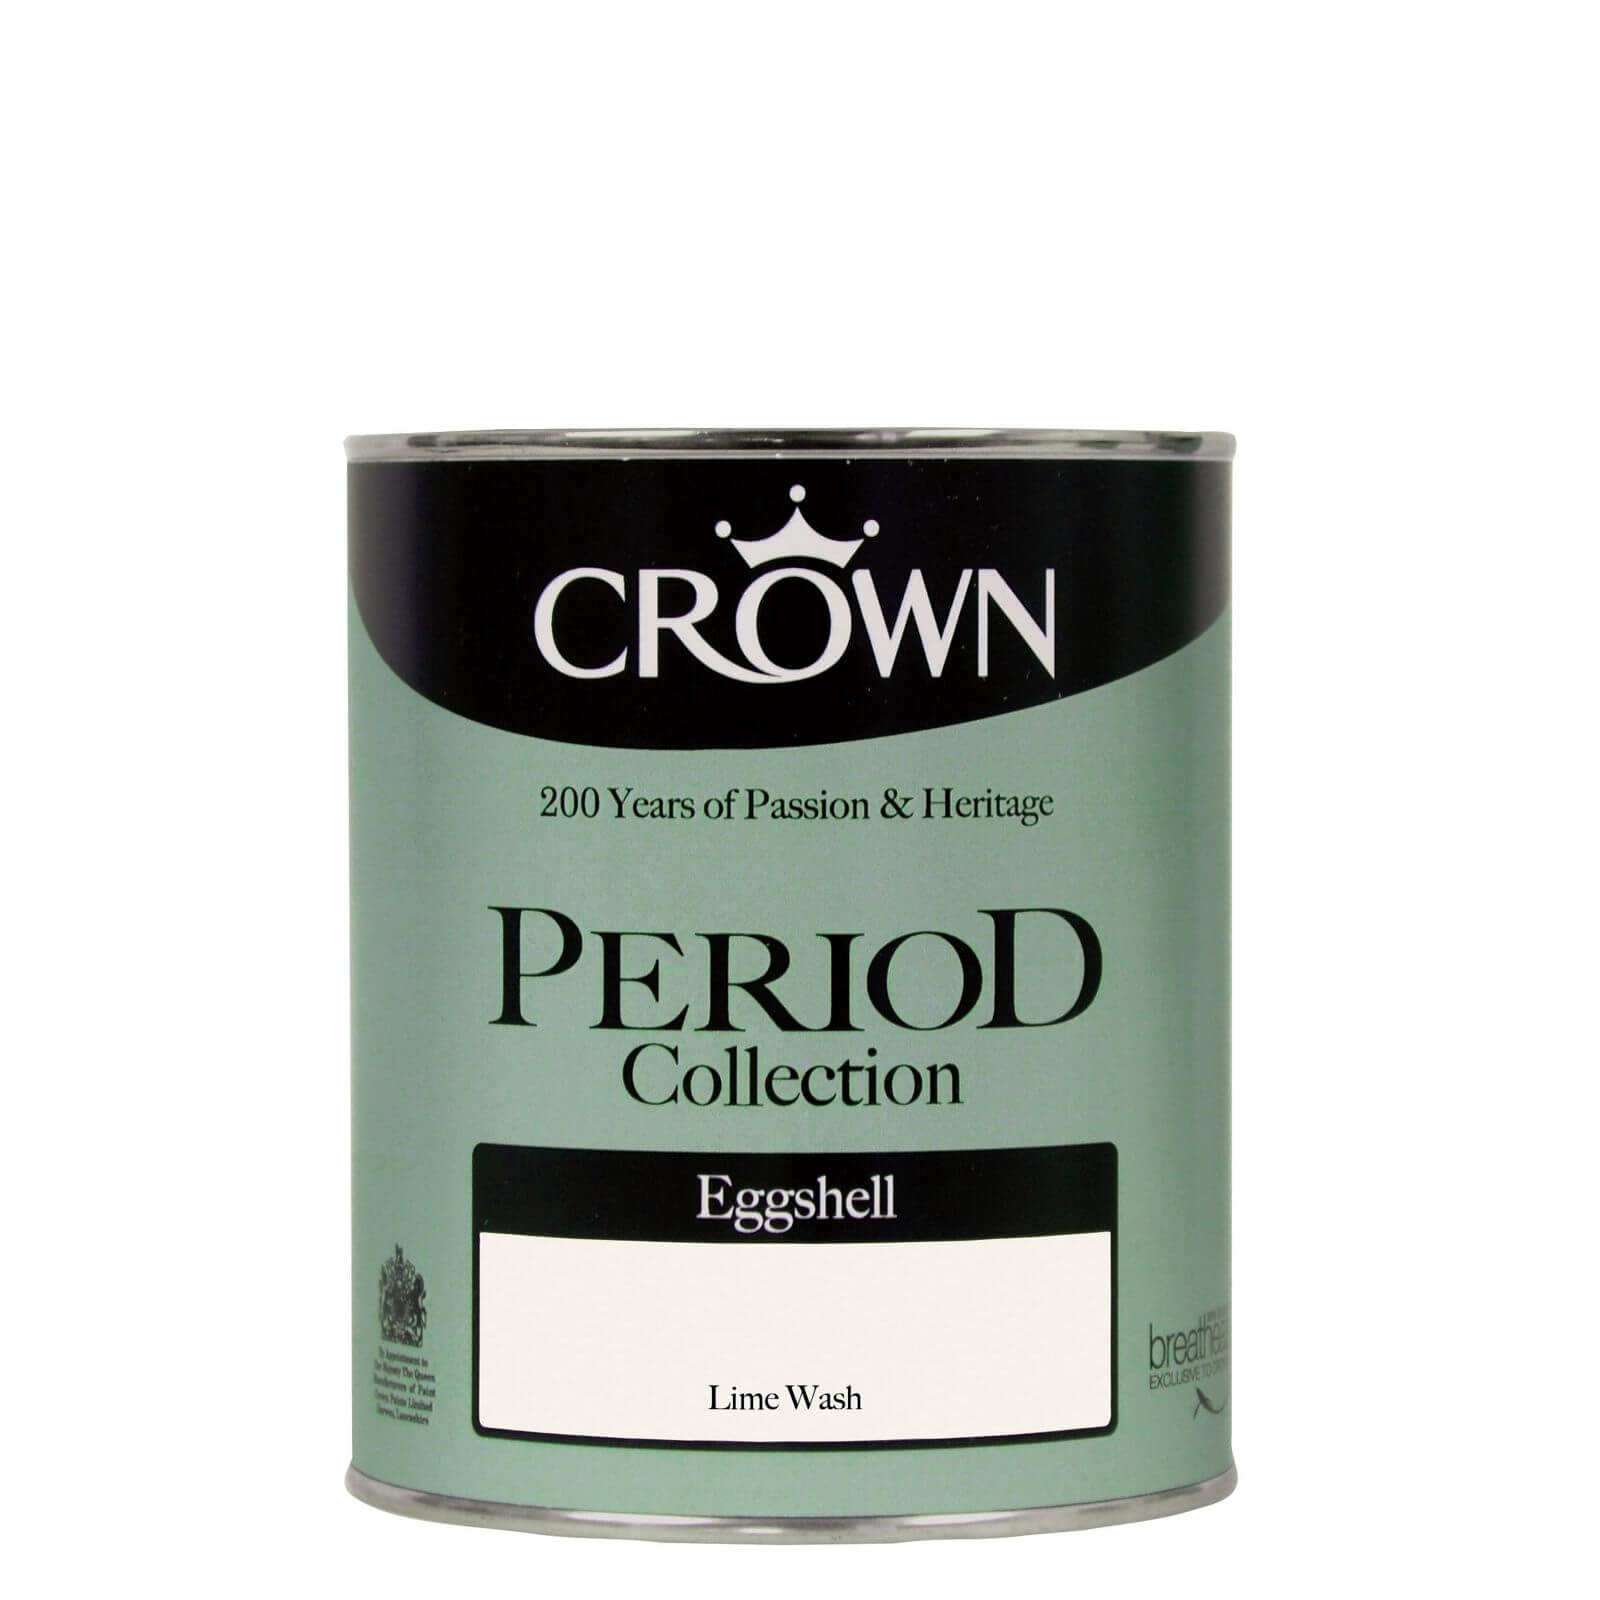 Crown Period Collection Lime Wash - Eggshell Paint - 750ml